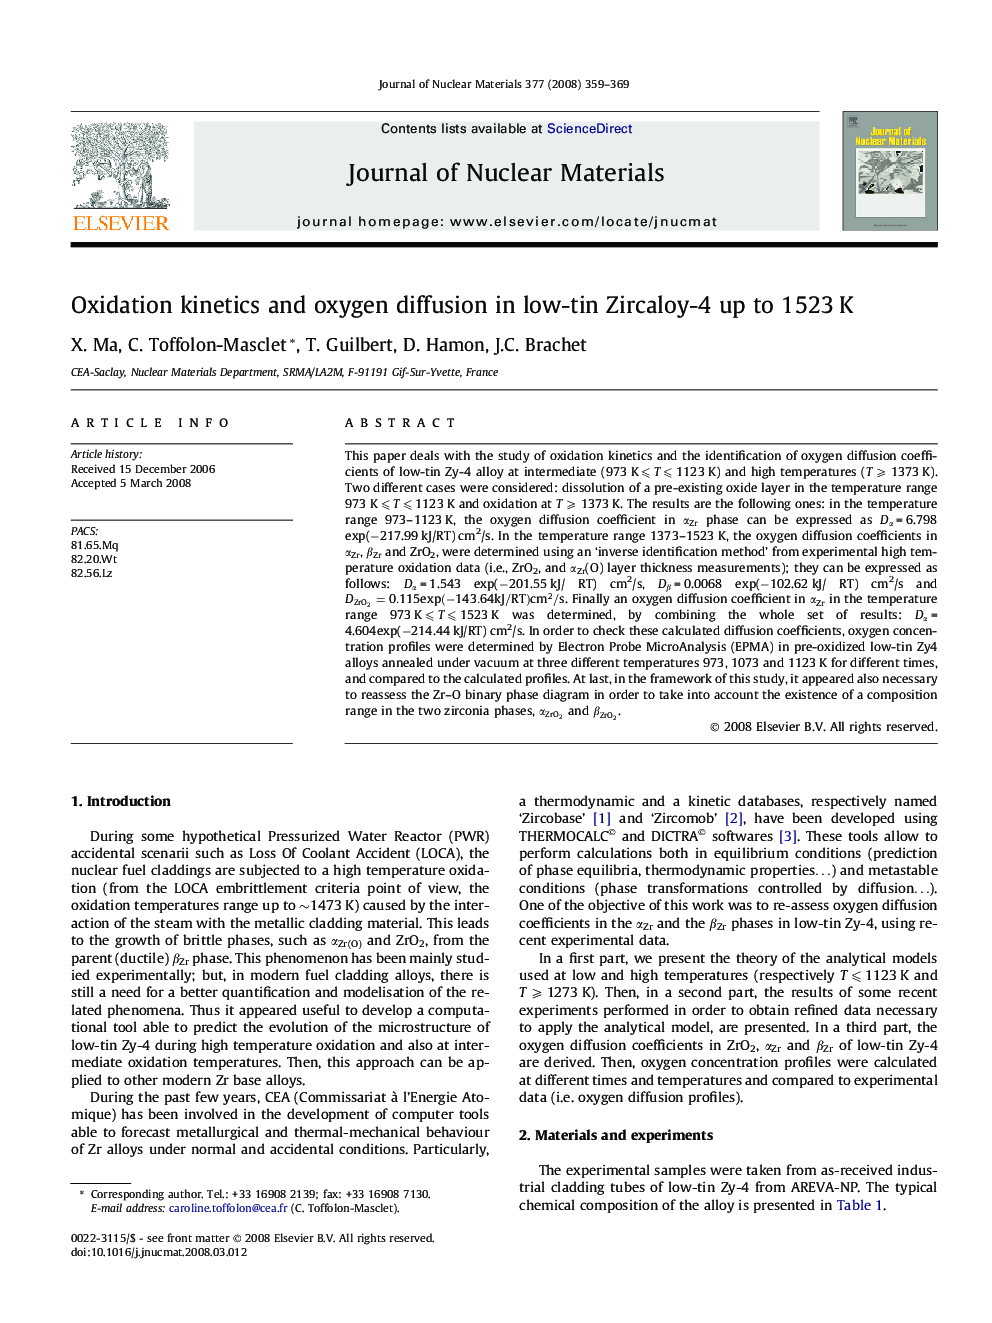 Oxidation kinetics and oxygen diffusion in low-tin Zircaloy-4 up to 1523 K